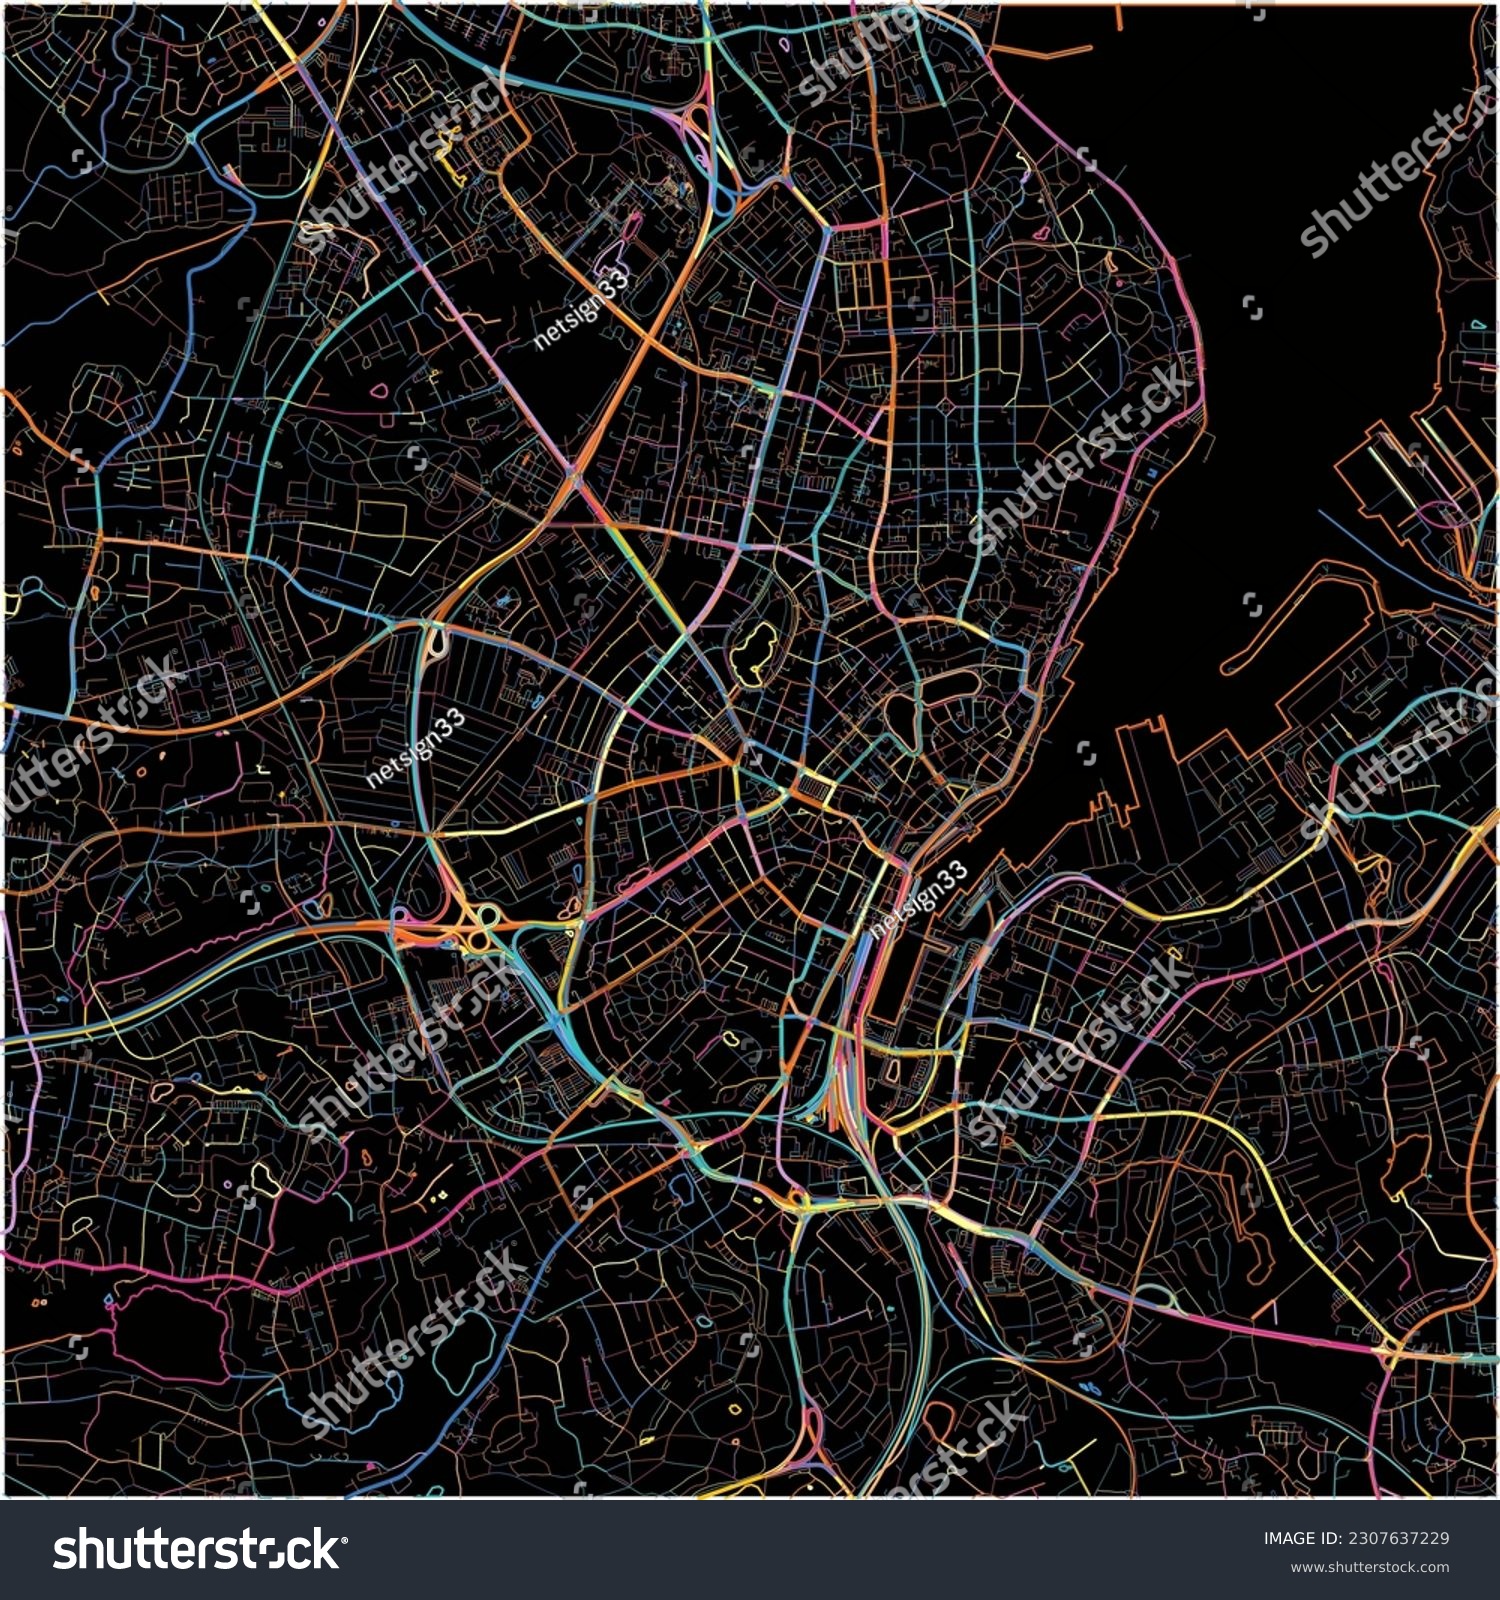 SVG of Map of Kiel, Schleswig-Holstein with all major and minor roads, railways and waterways. Colorful line art on black background. svg